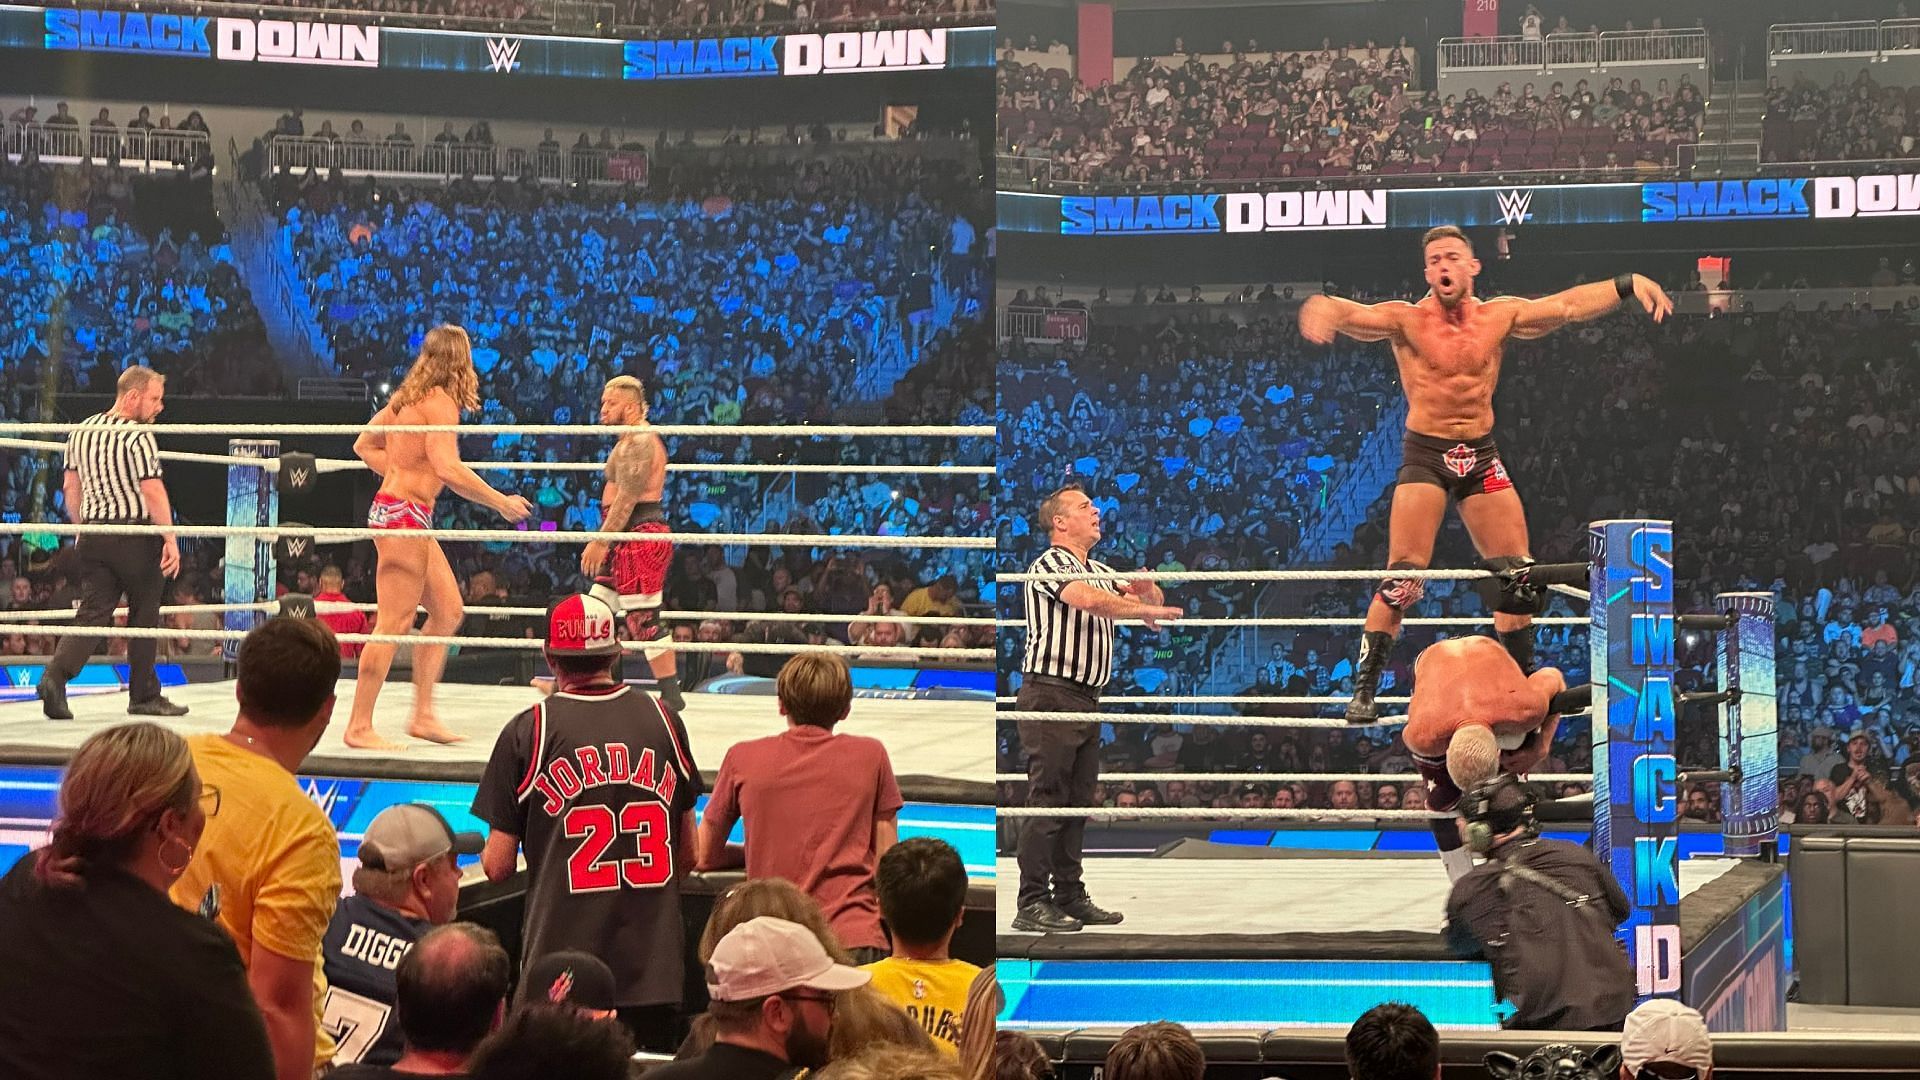 2 matches happened after smackdown off air